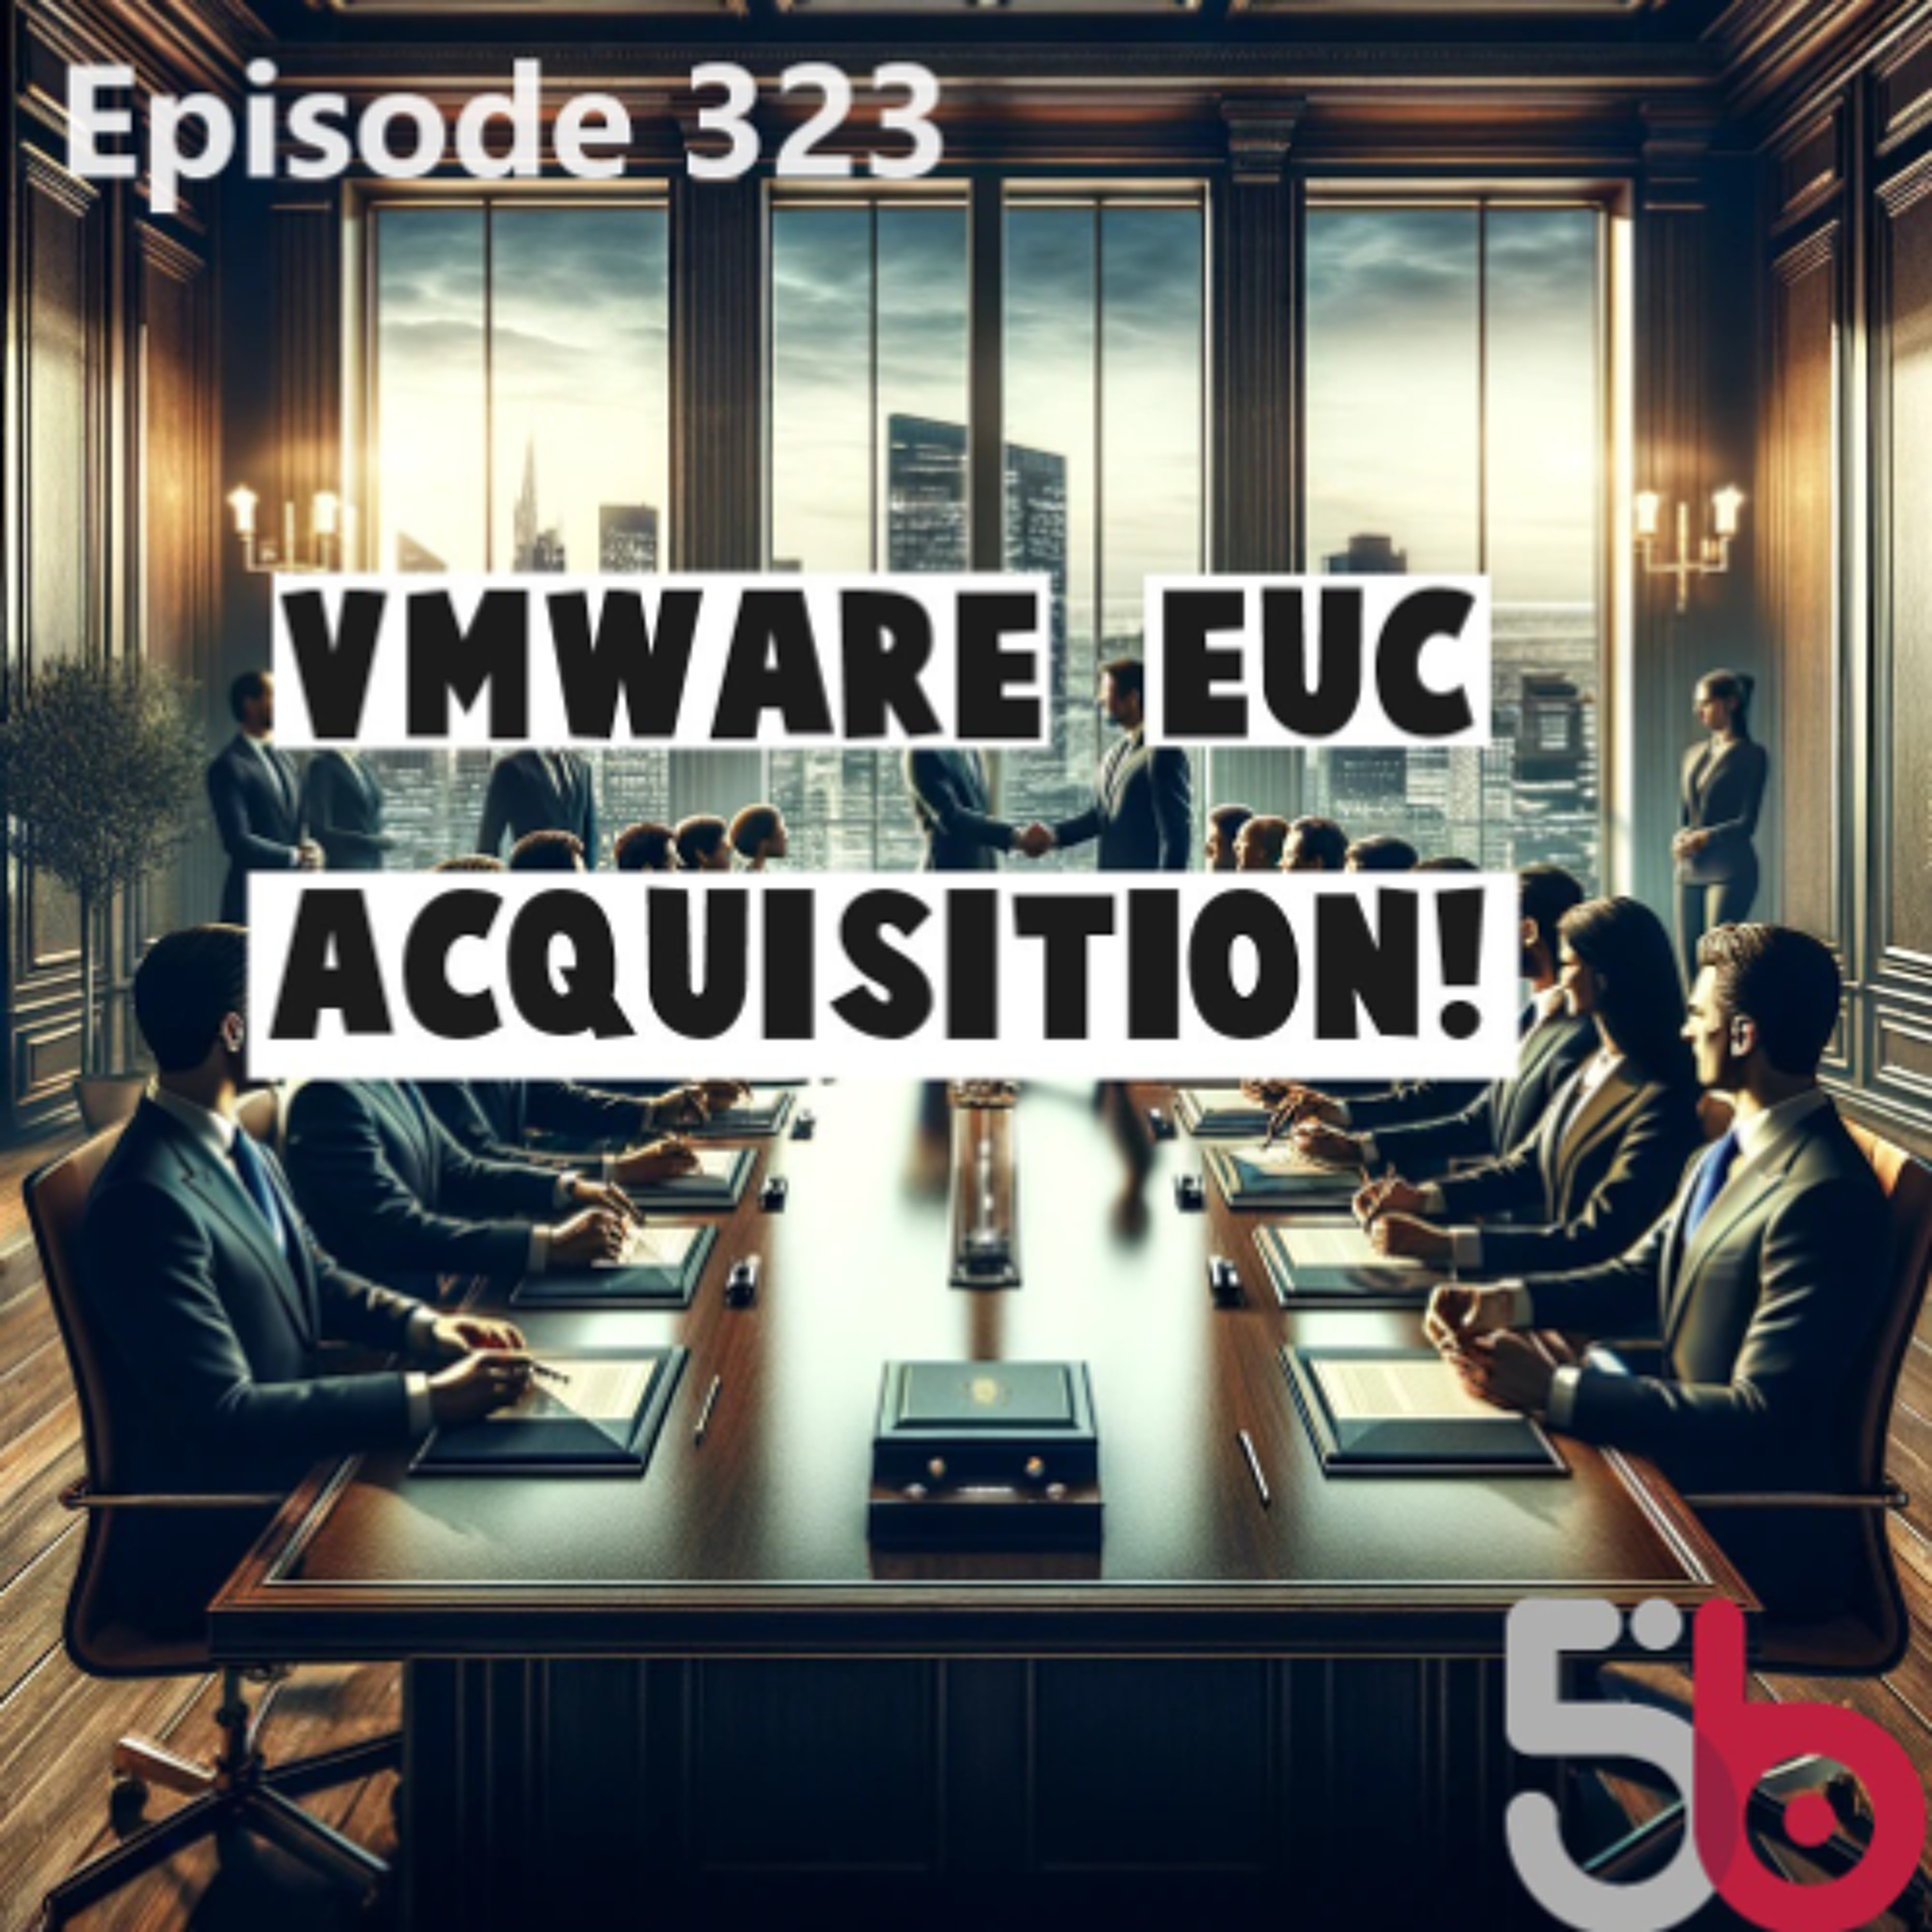 VMware EUC to be Acquired! Failed Win11 Patch! Wi-Fi 7 Testing in Windows!